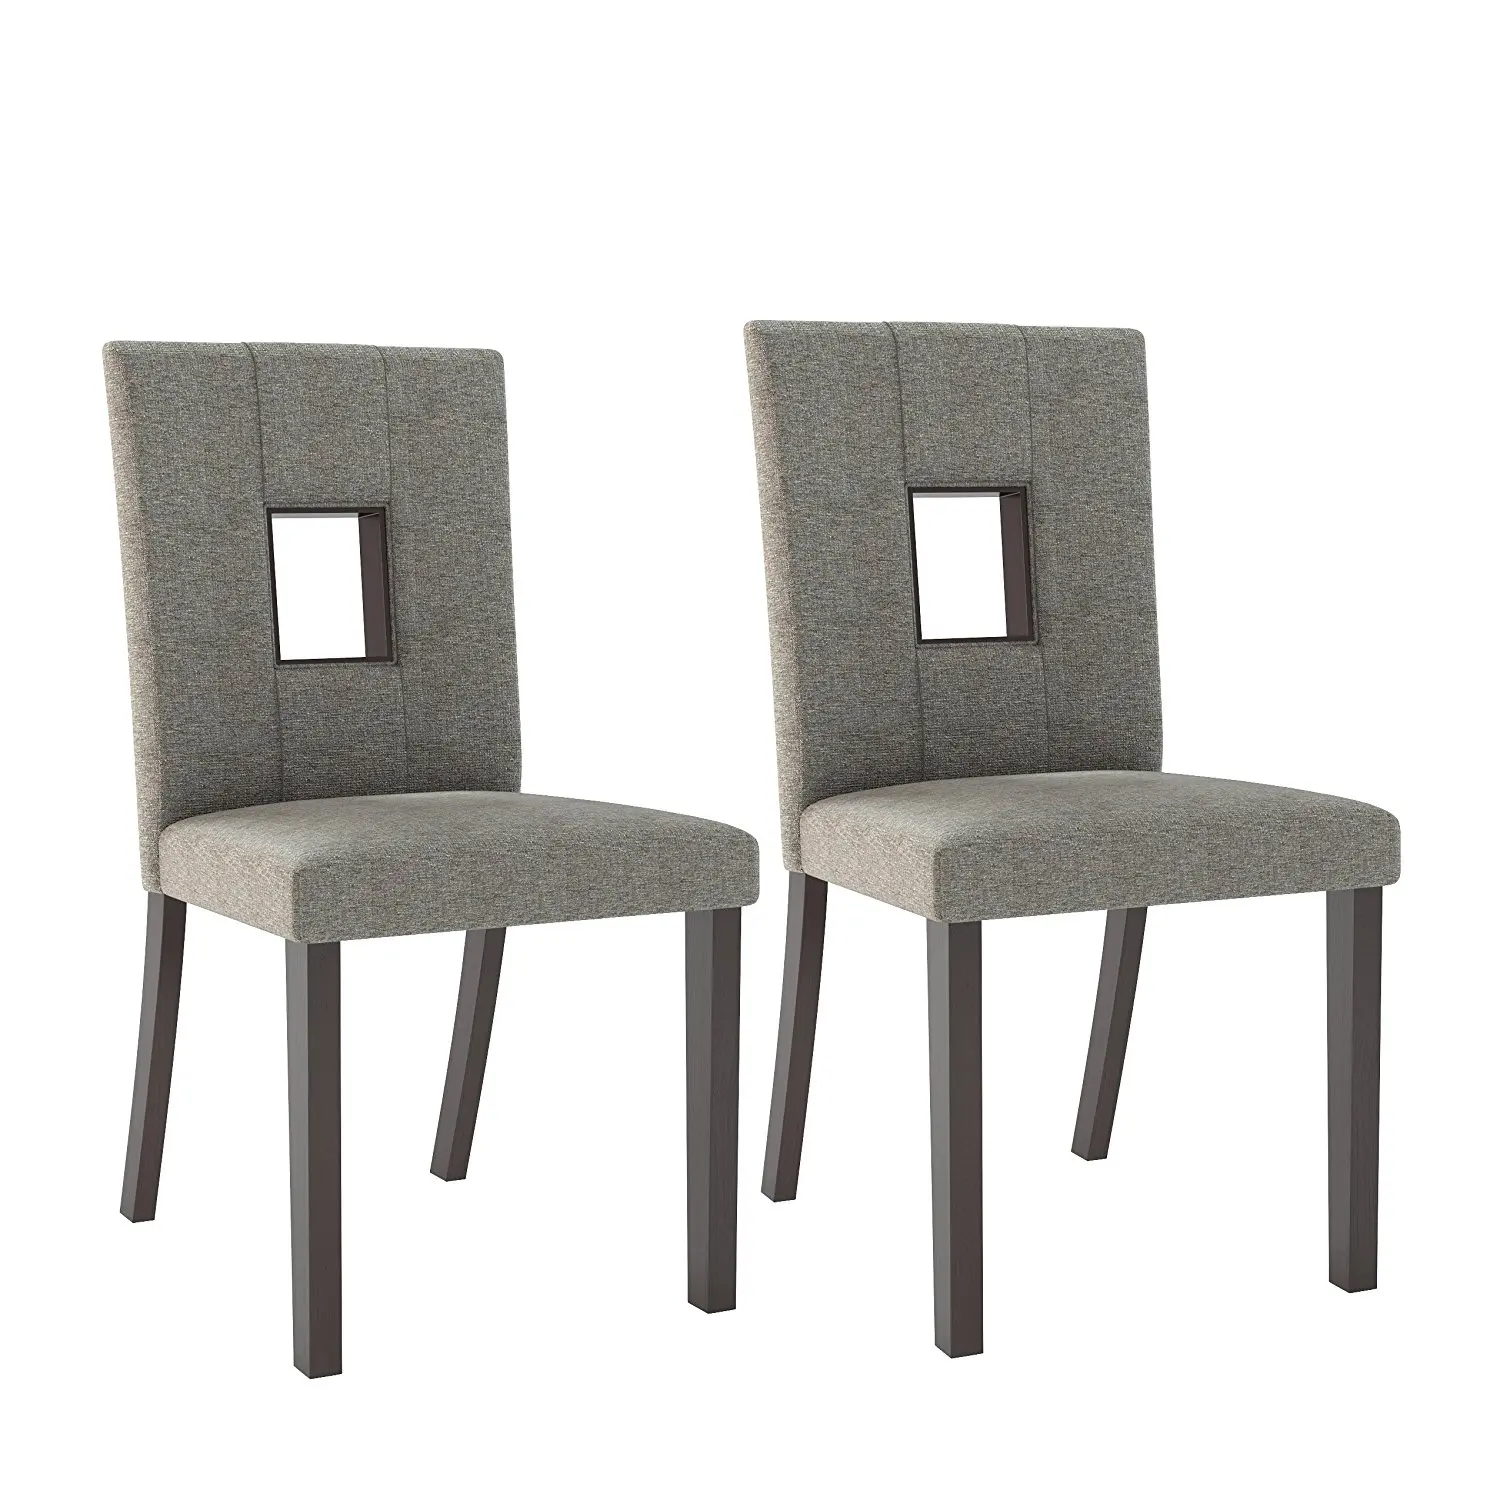 Cheap Grey Dining Room Chairs, find Grey Dining Room Chairs deals on